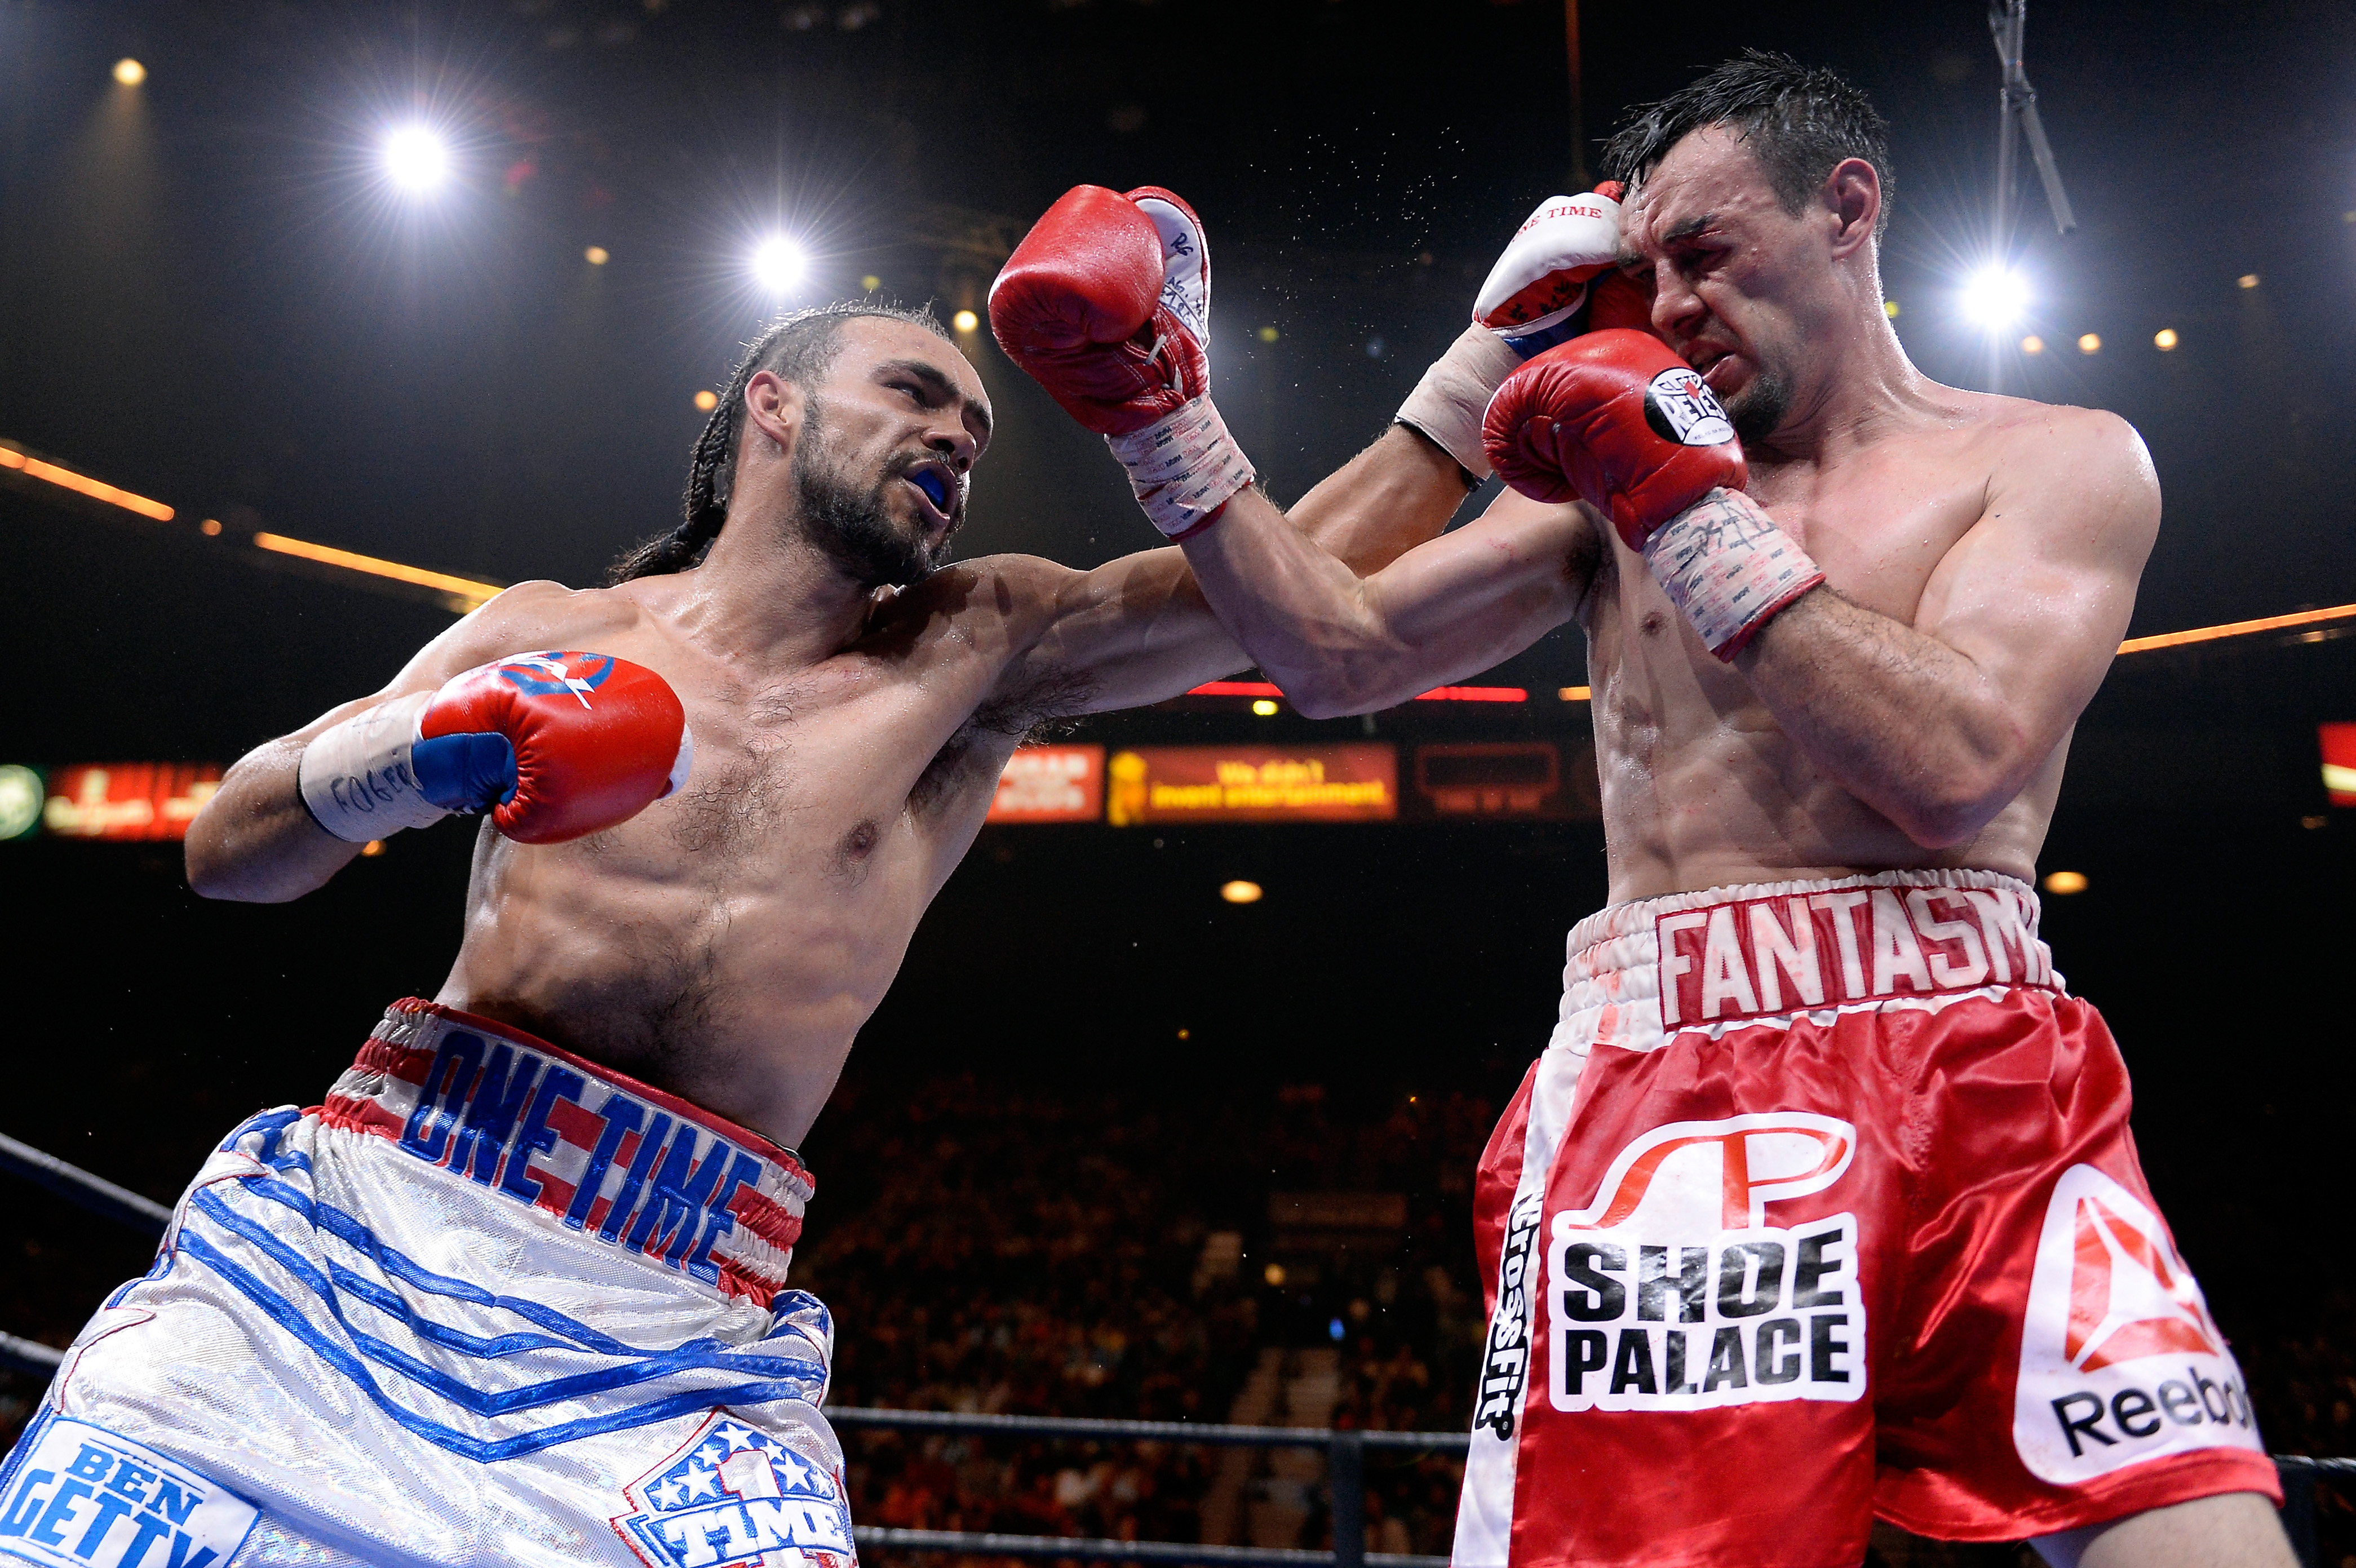  Robert Guerrero (red trunks) and Keith Thurman (white trunks)  (Getty)